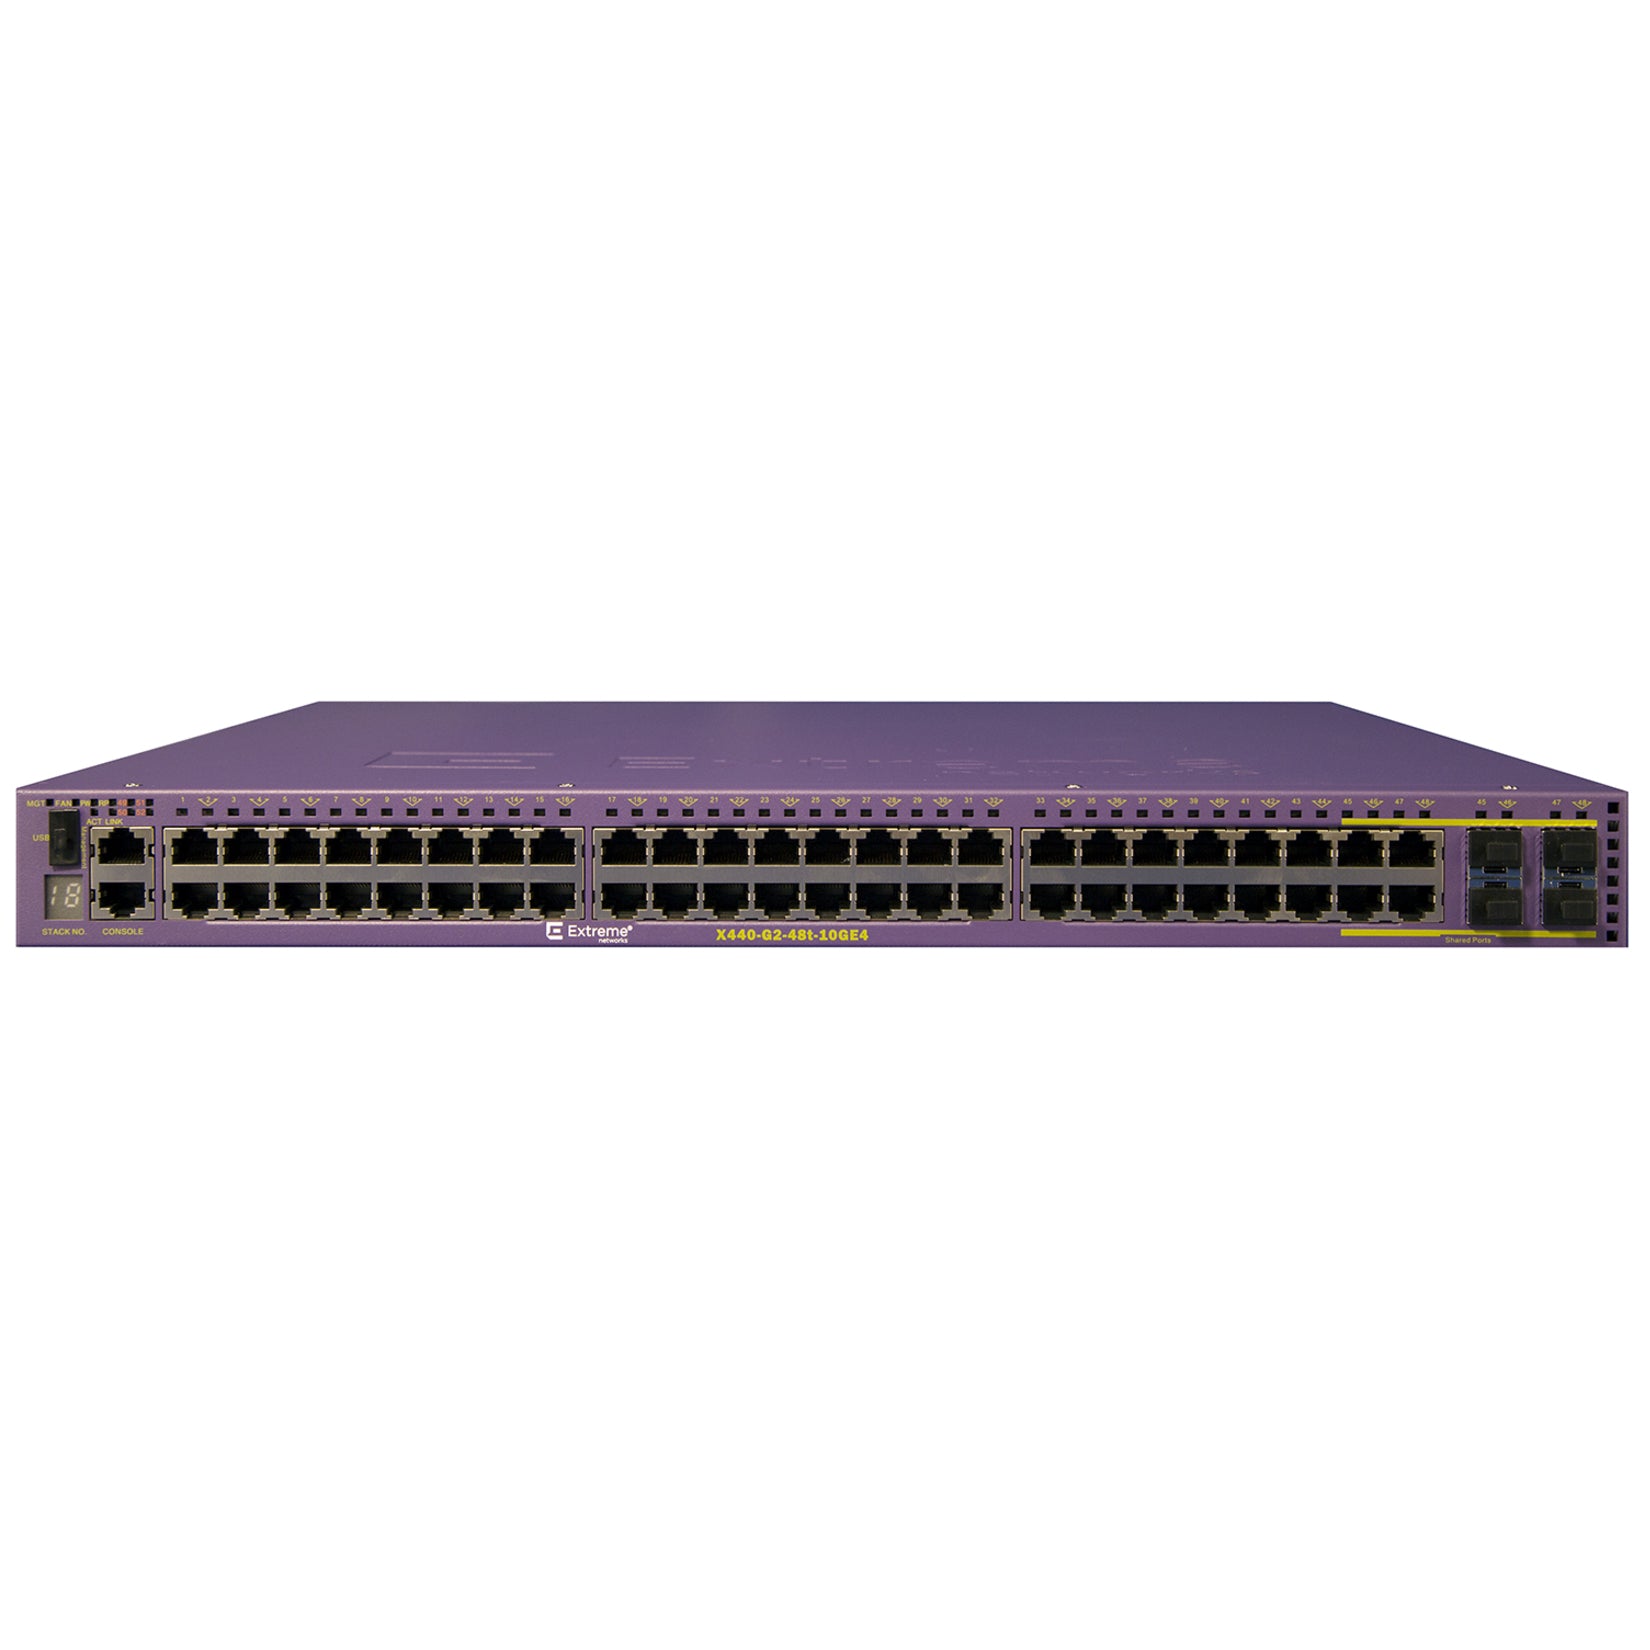 Extreme Networks X440-G2-48t-10GE4 Ethernet Switch (16534)